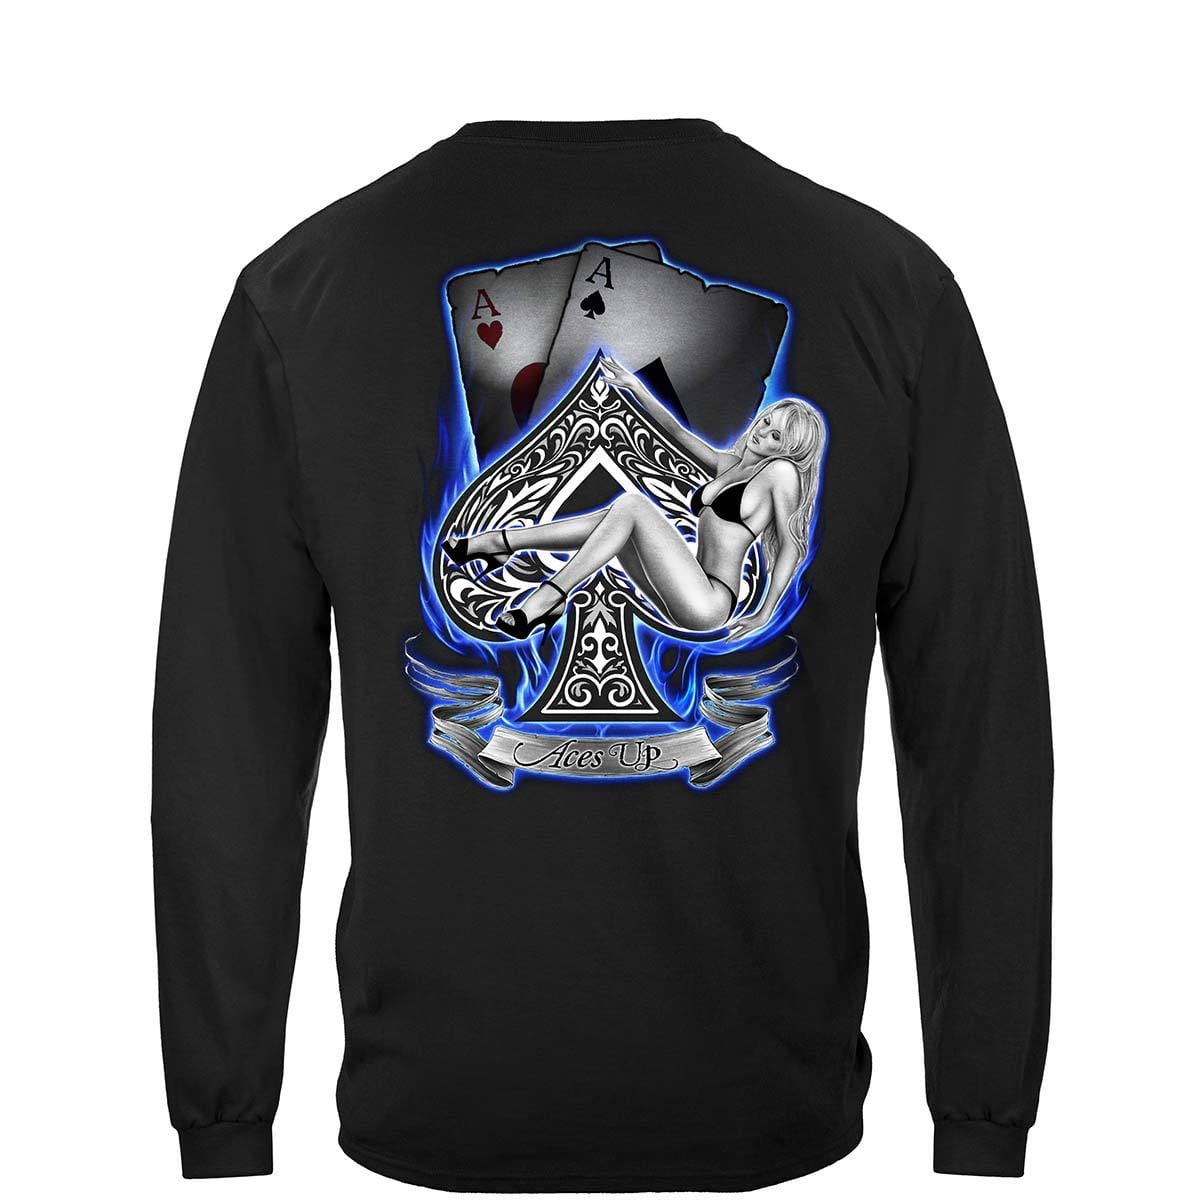 Aces Up Premium Hooded Sweat Shirt